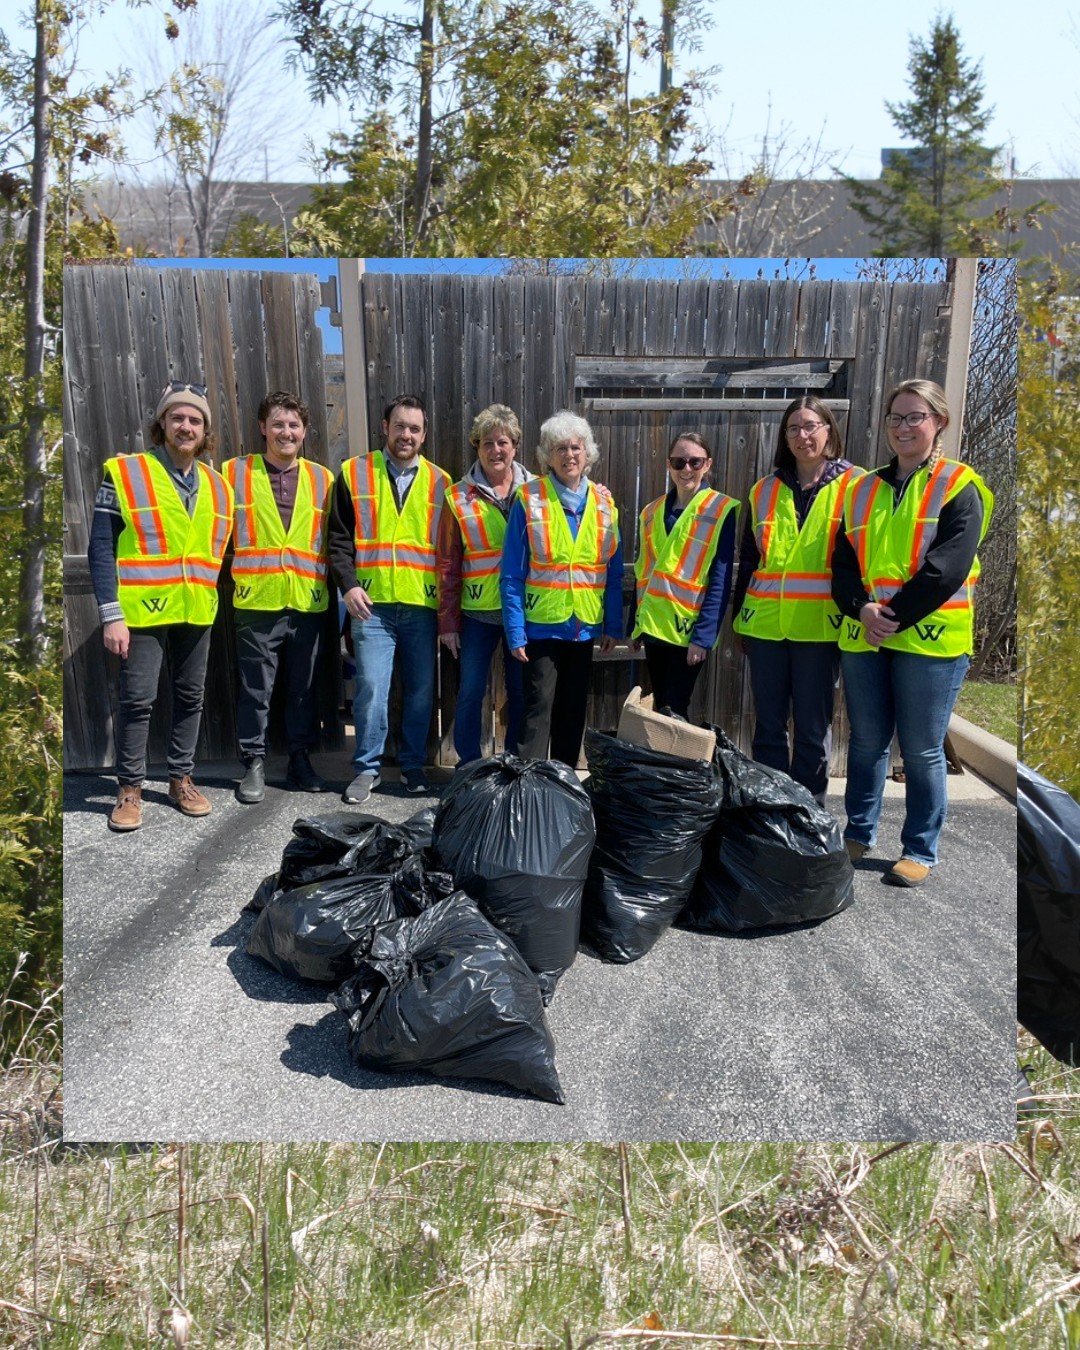 Get outside and show the earth some extra love today! 

Each year we take on neighbourhood clean-up projects in honour of Earth Day. 

Remember, it doesn&rsquo;t have to be big to make an impact. Even just picking up a few pieces of trash from around